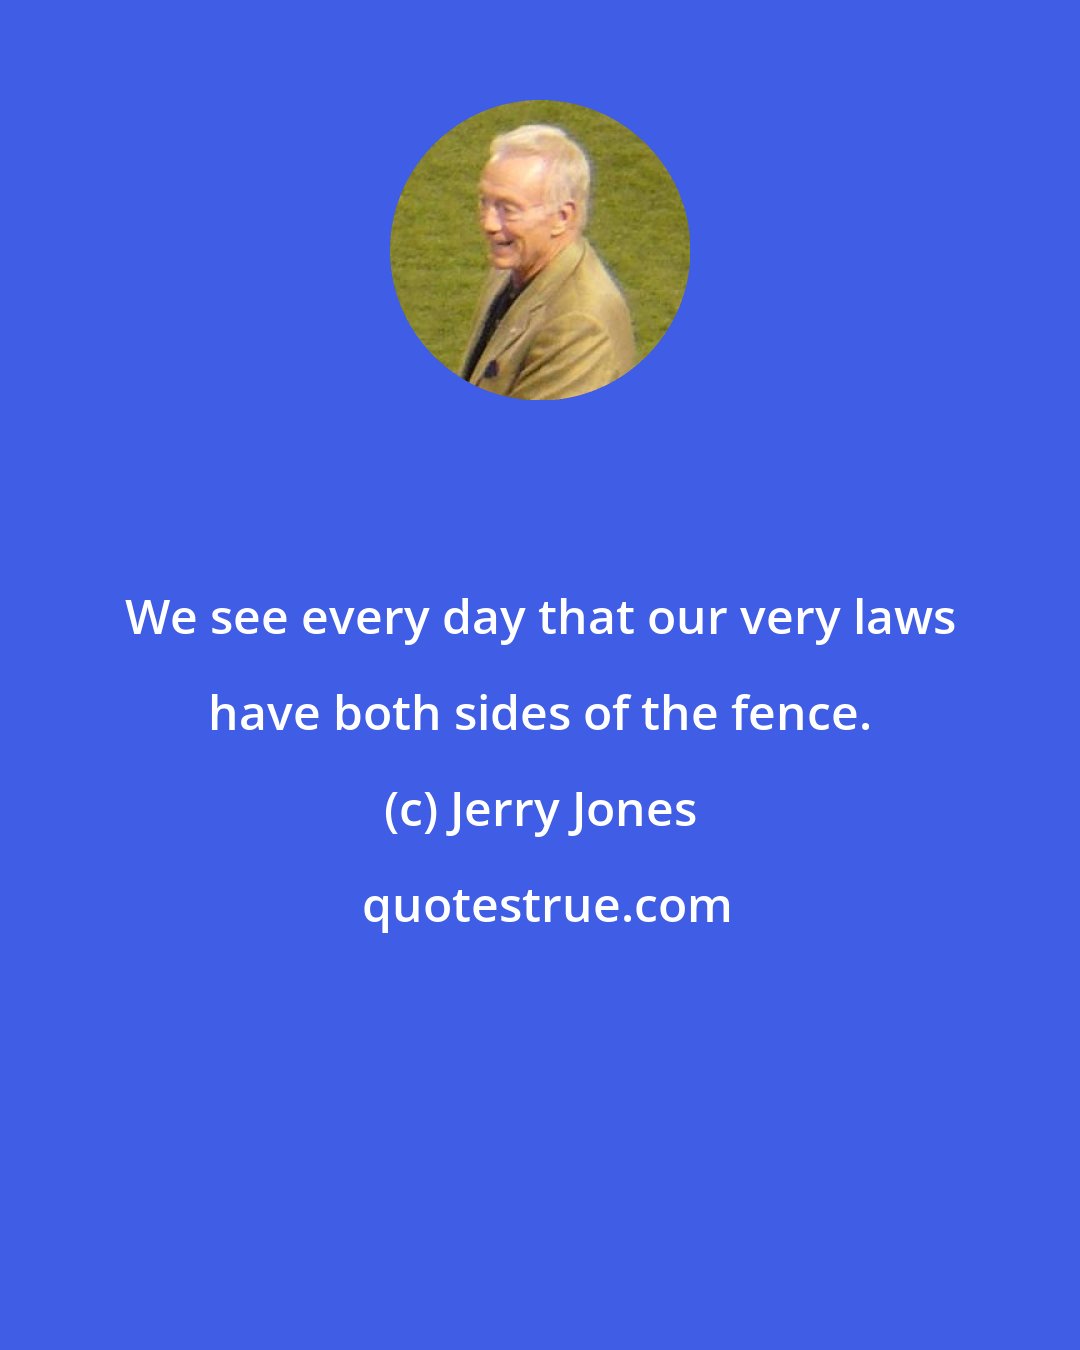 Jerry Jones: We see every day that our very laws have both sides of the fence.